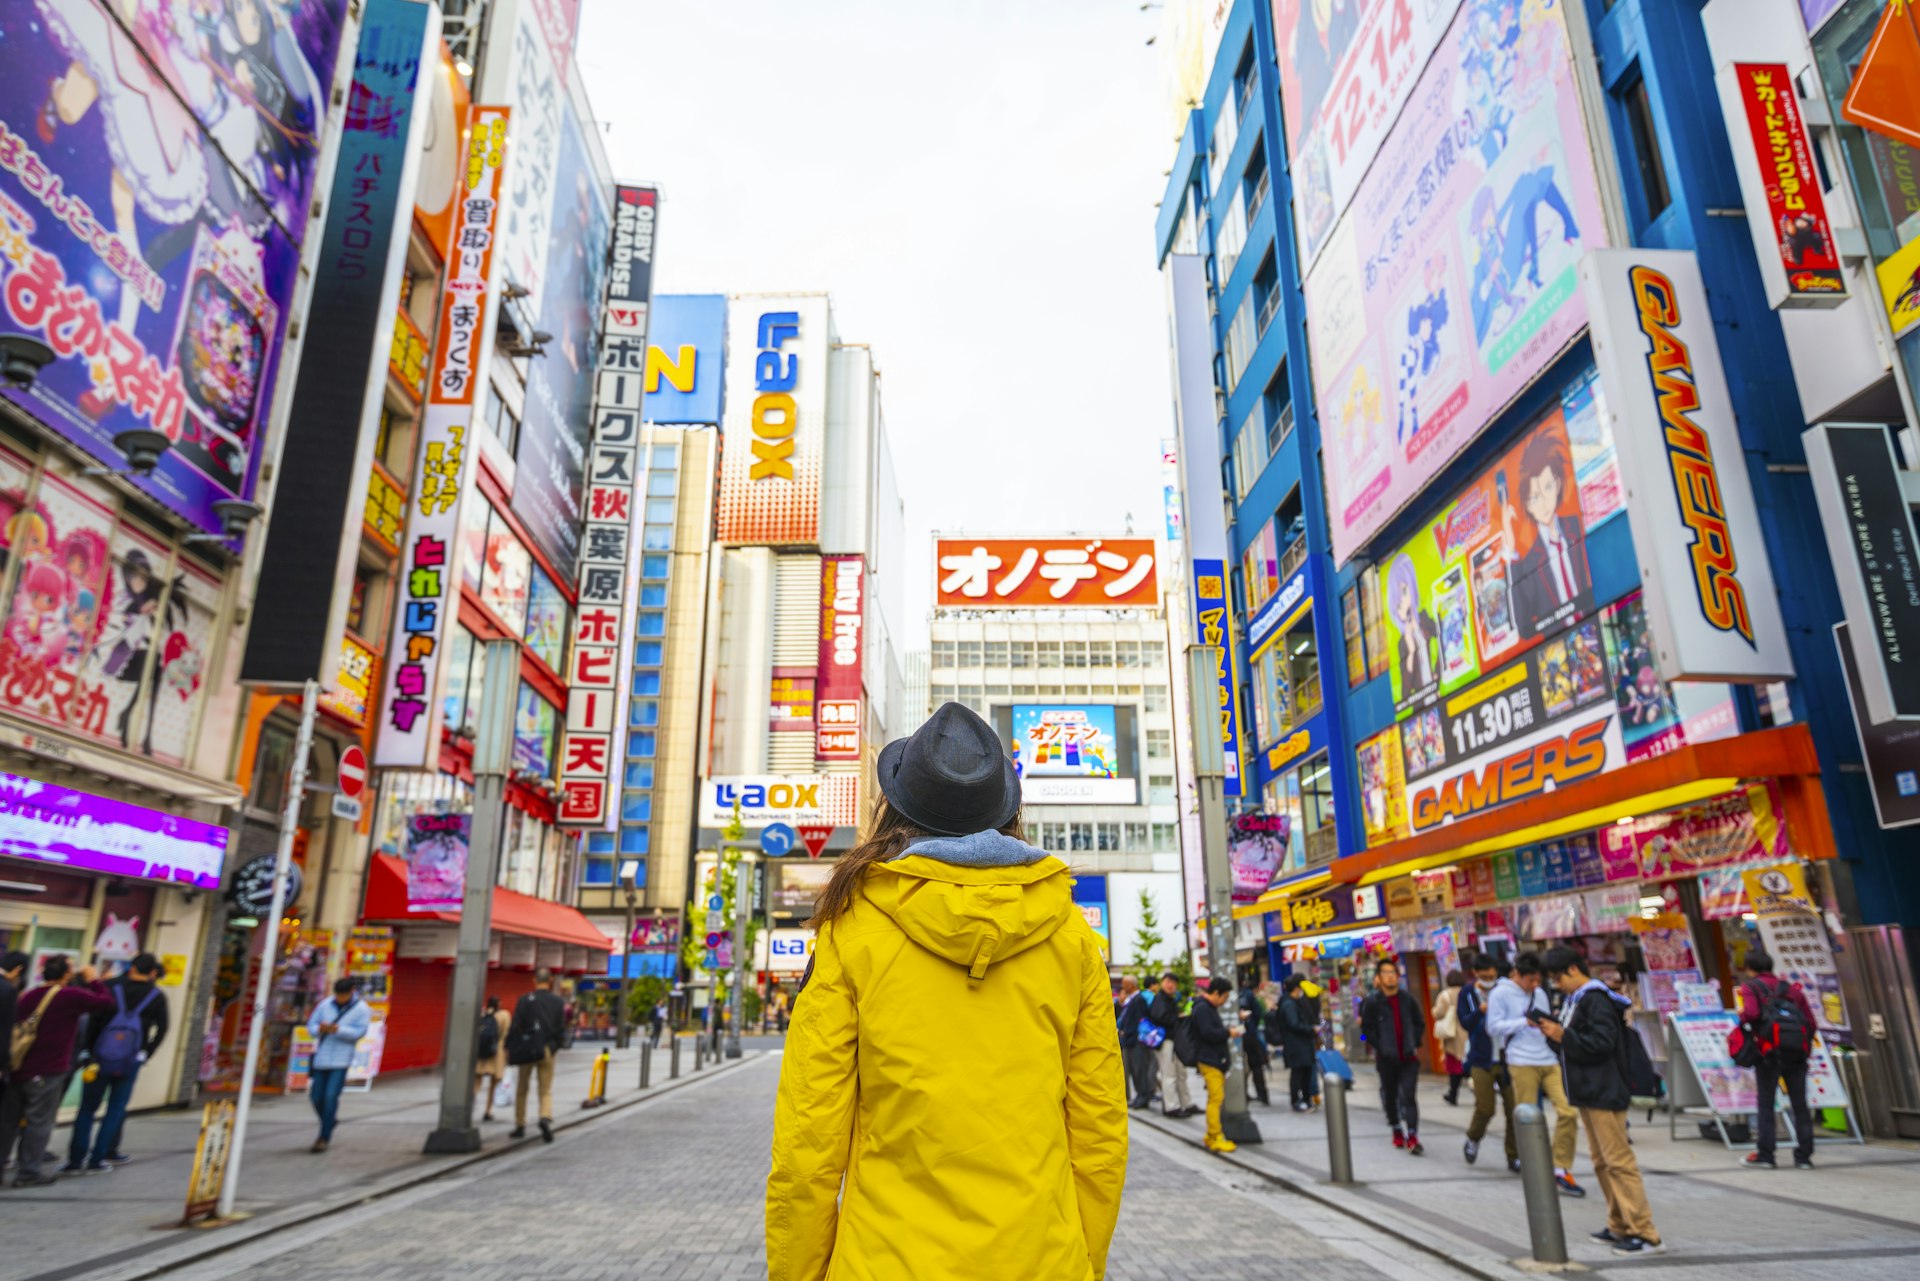 Woman with a yellow jacket walking in the electronic town district of Akihabara, Tokyo, Japan